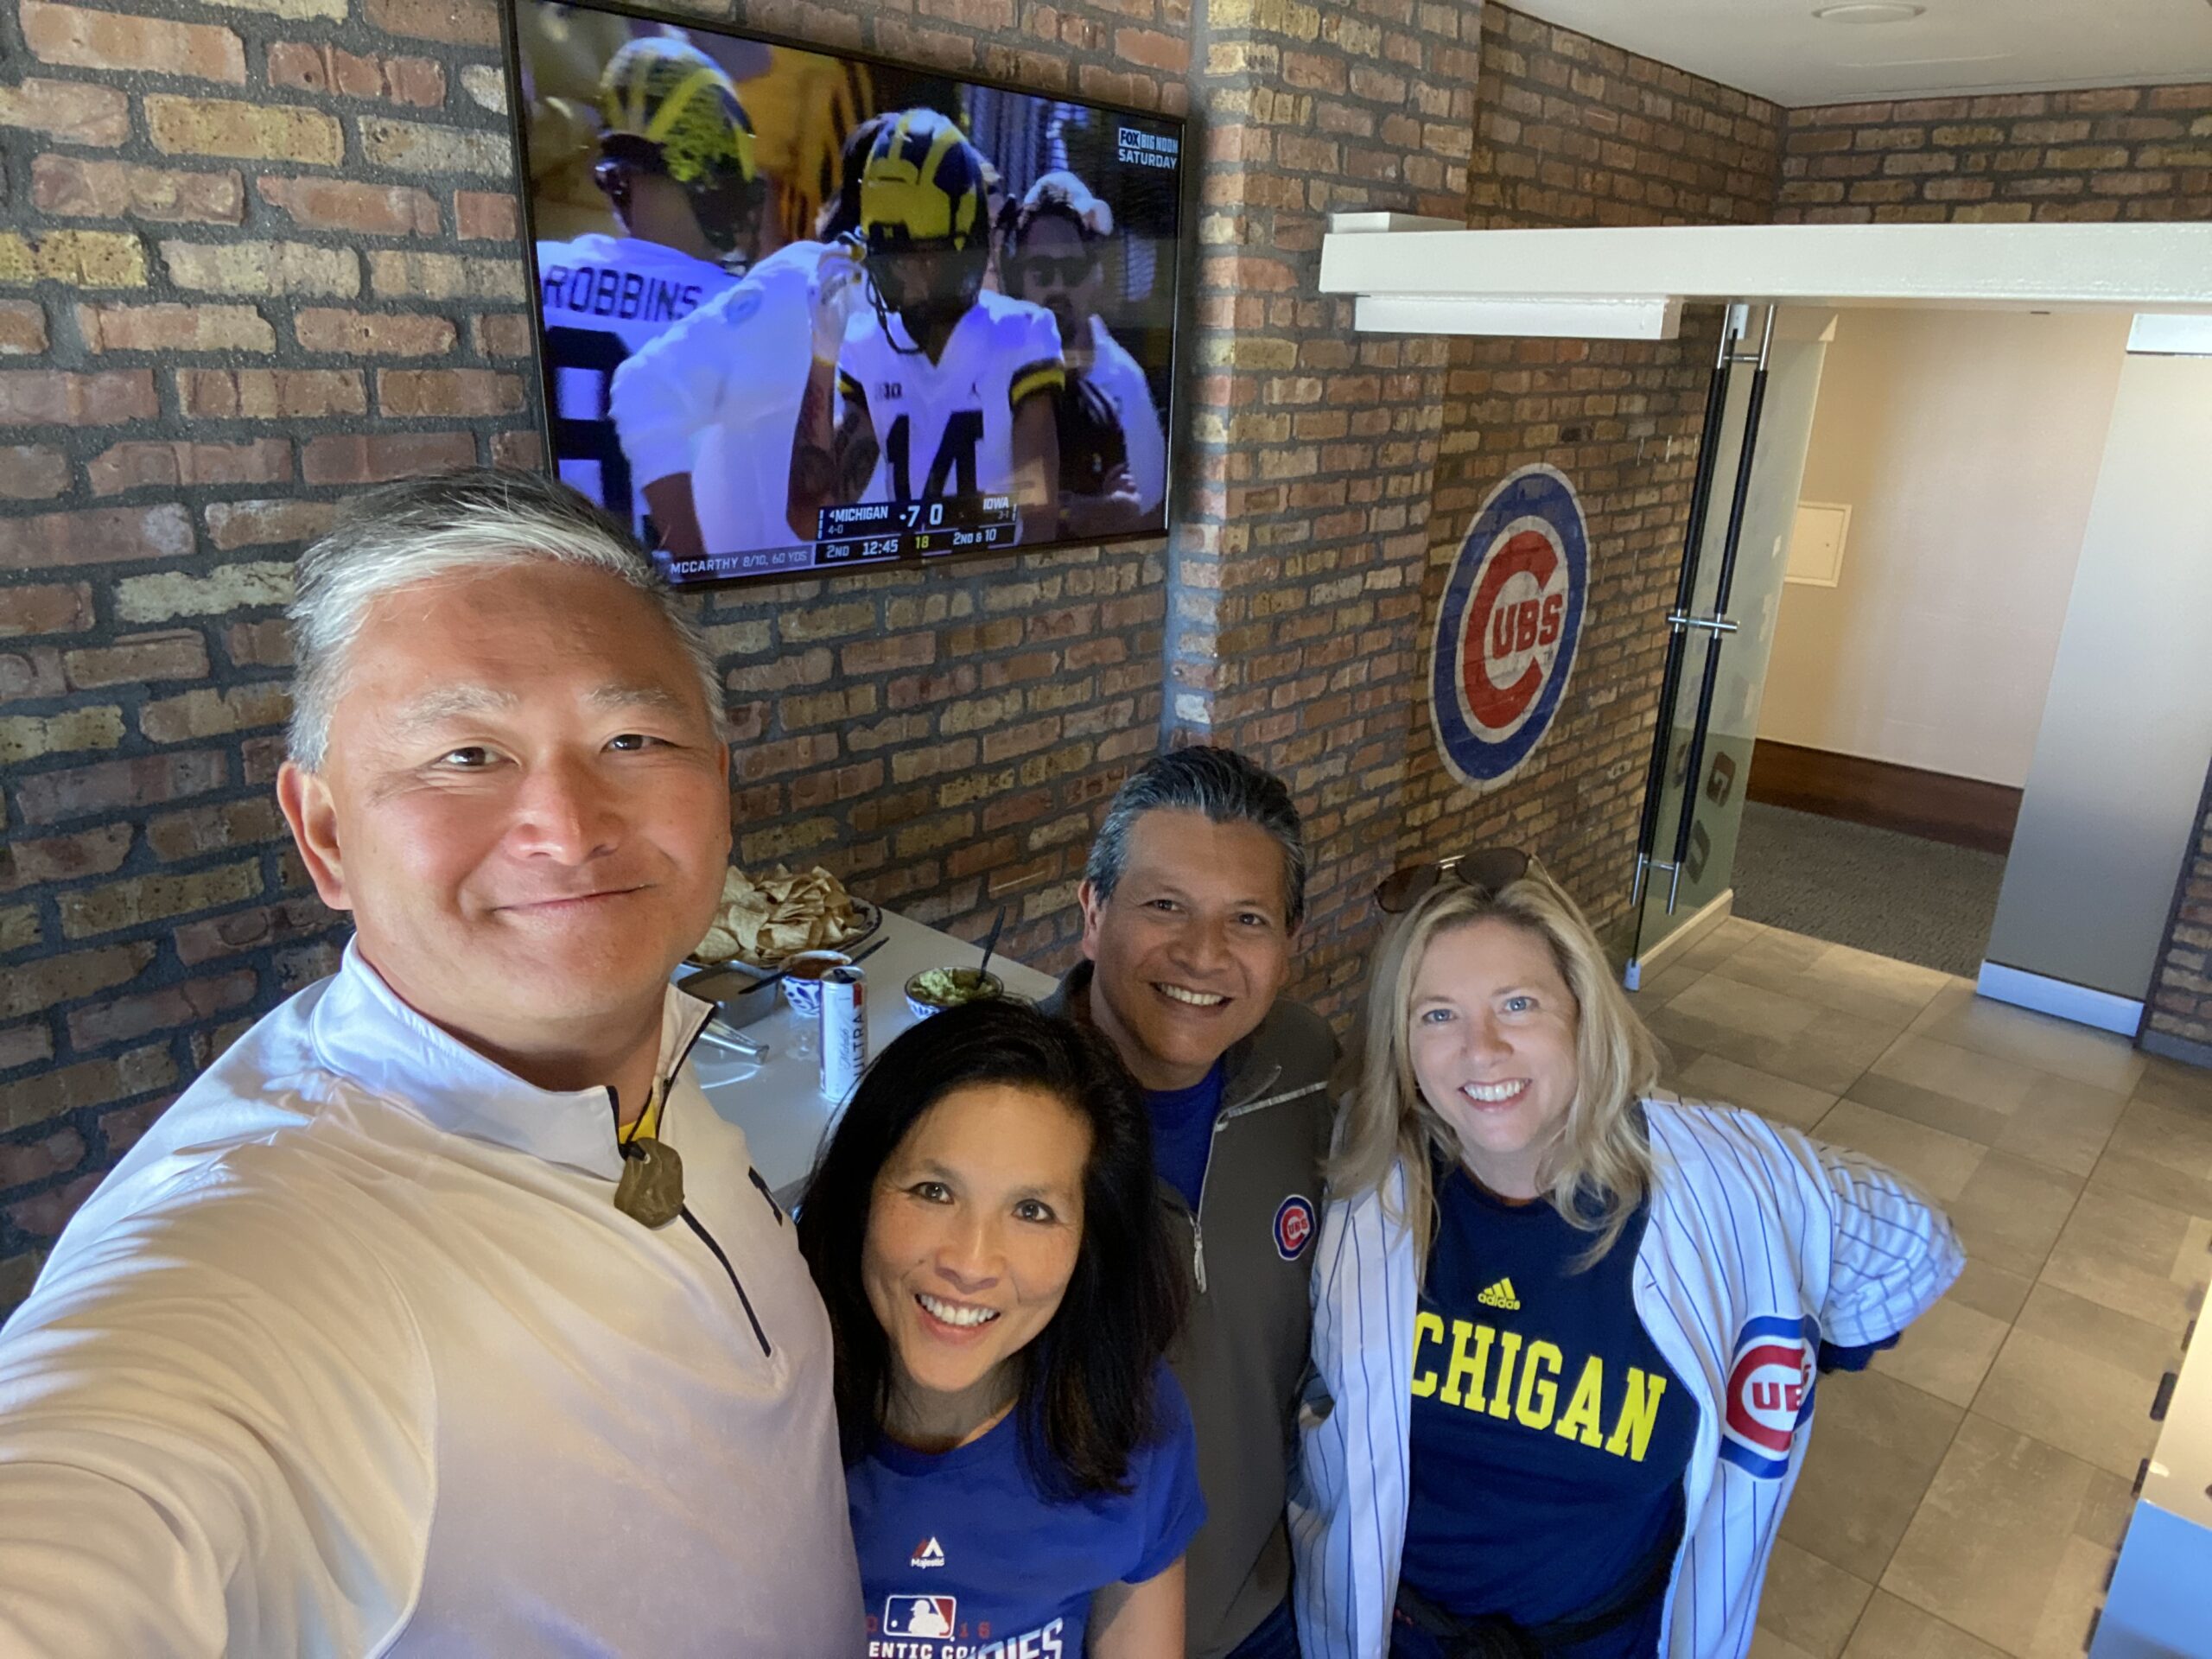 Hamilton Chang, ’89, and others supported Wolverine football while also enjoying a day of baseball at Wrigley Field in Chicago.